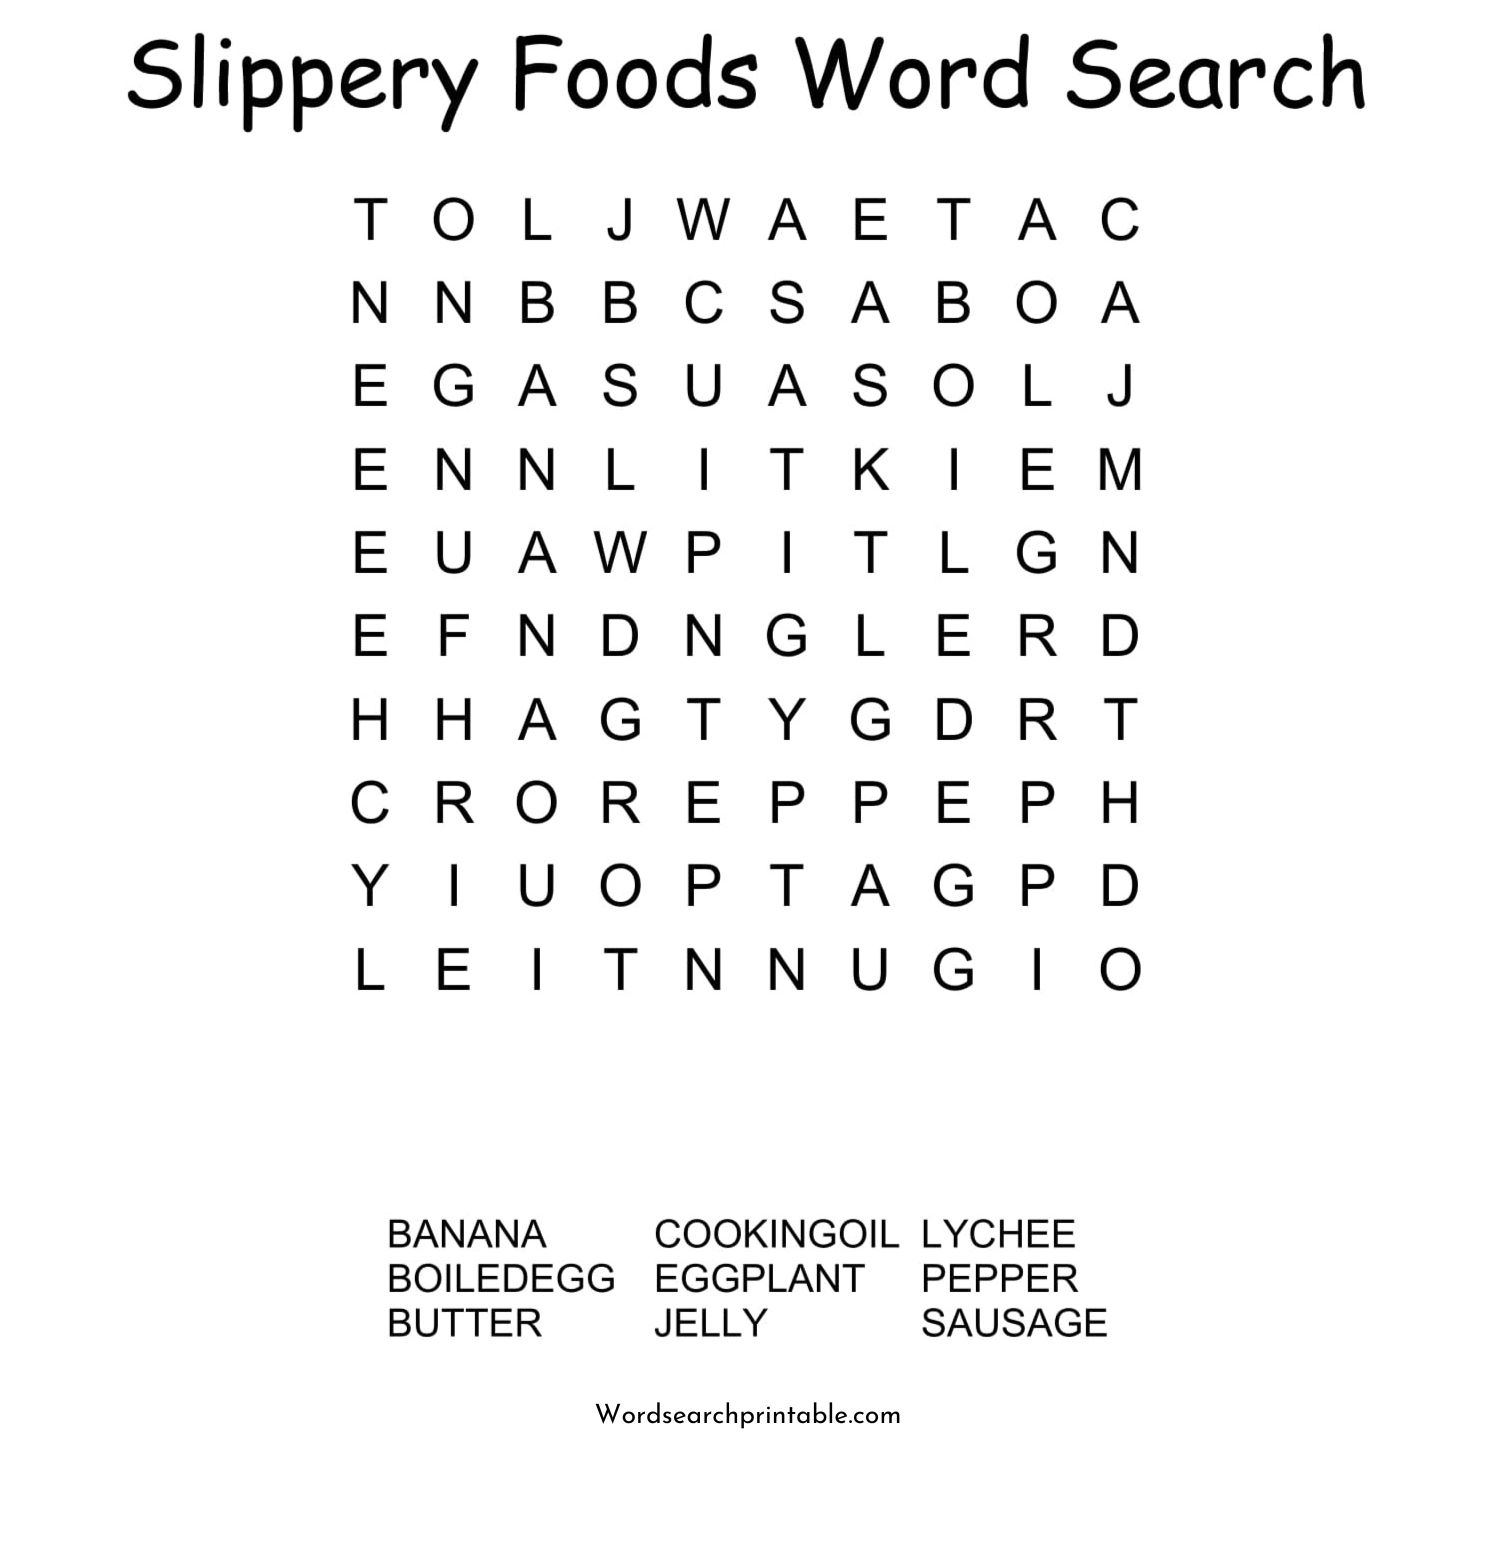 slippery foods word search puzzle